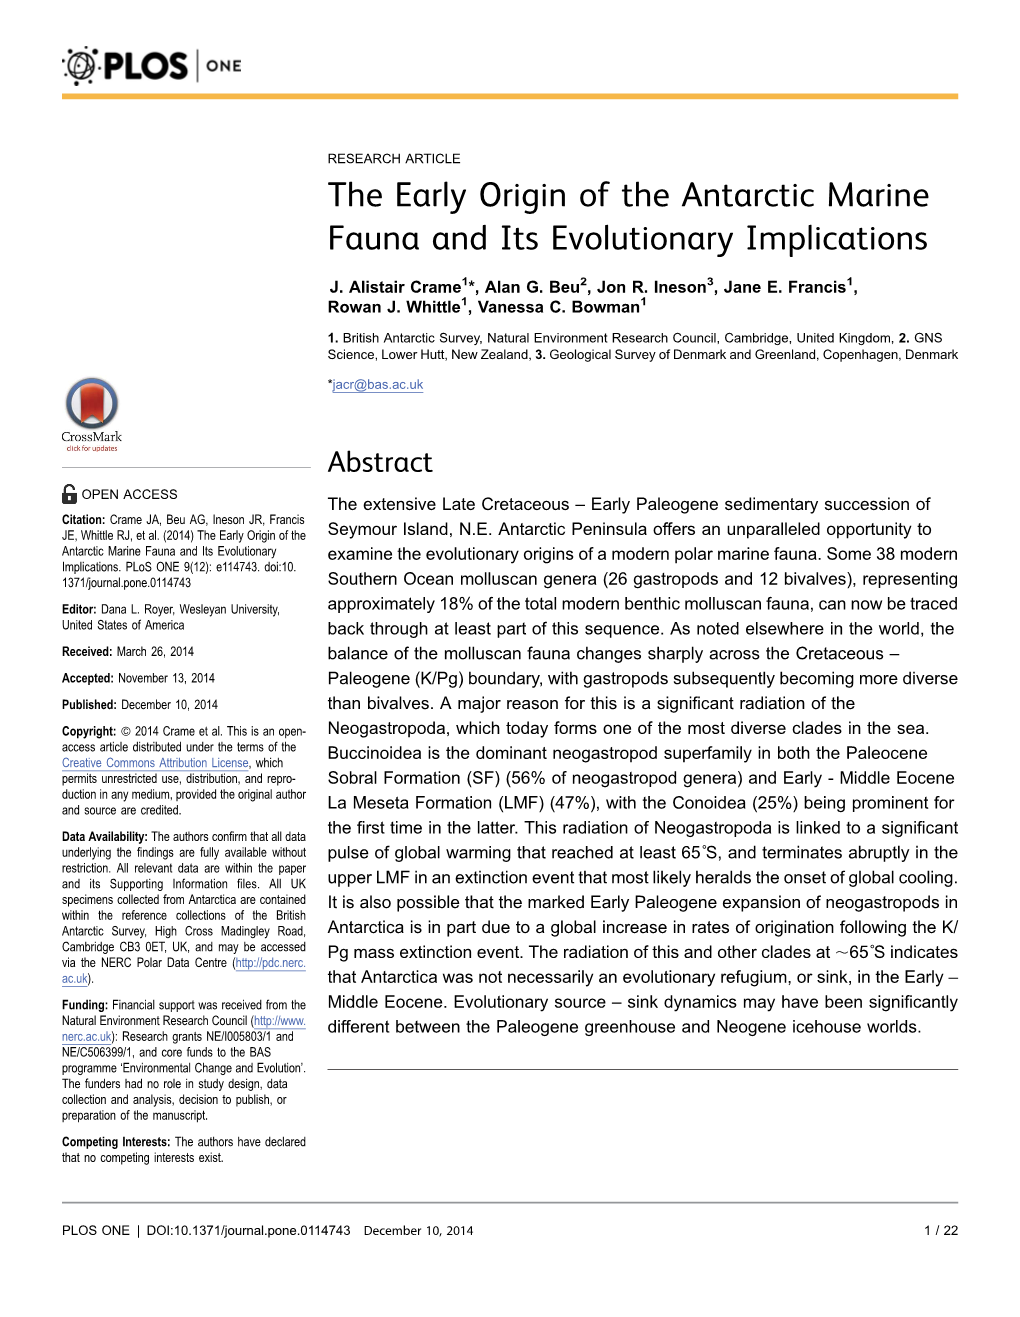 The Early Origin of the Antarctic Marine Fauna and Its Evolutionary Implications